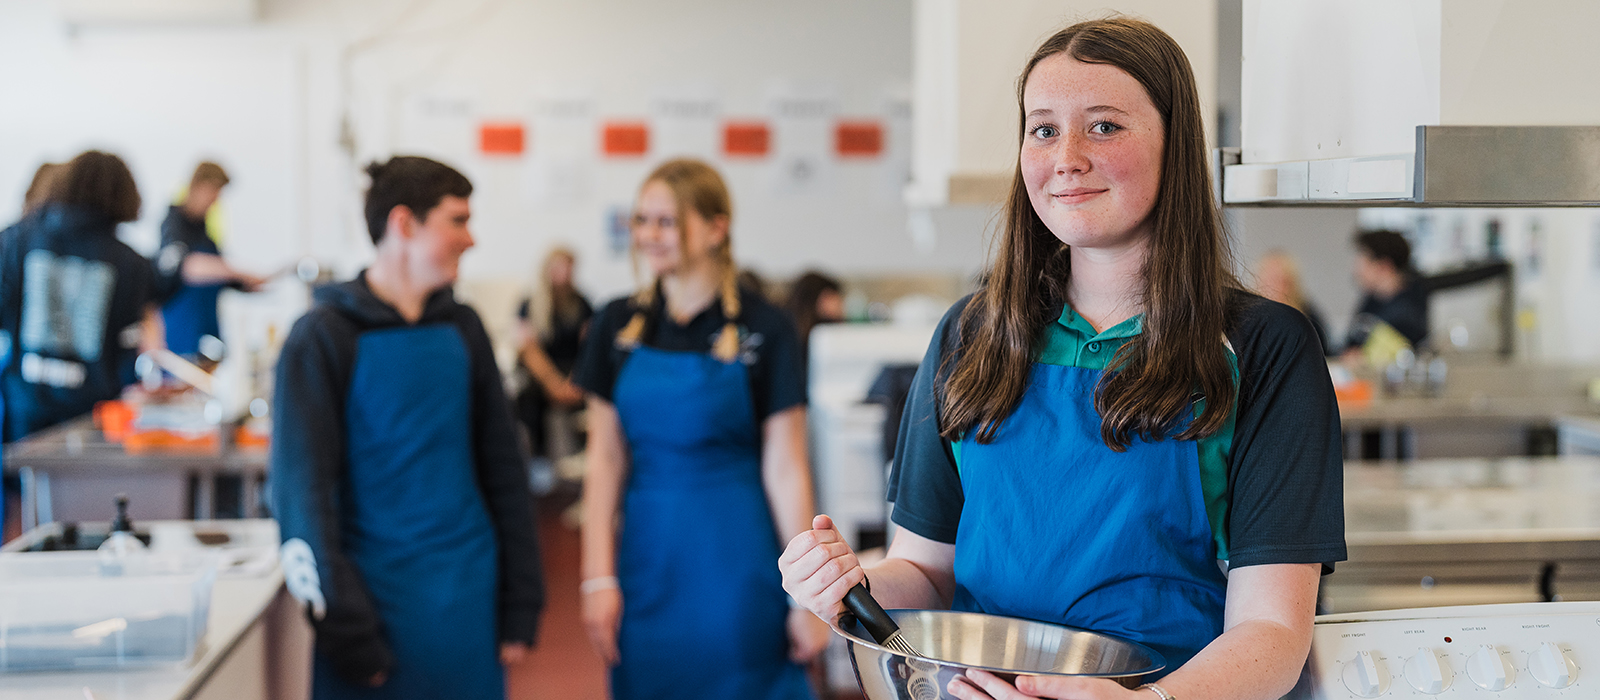 Female teenager holding mixing bowl in commercial kitchen